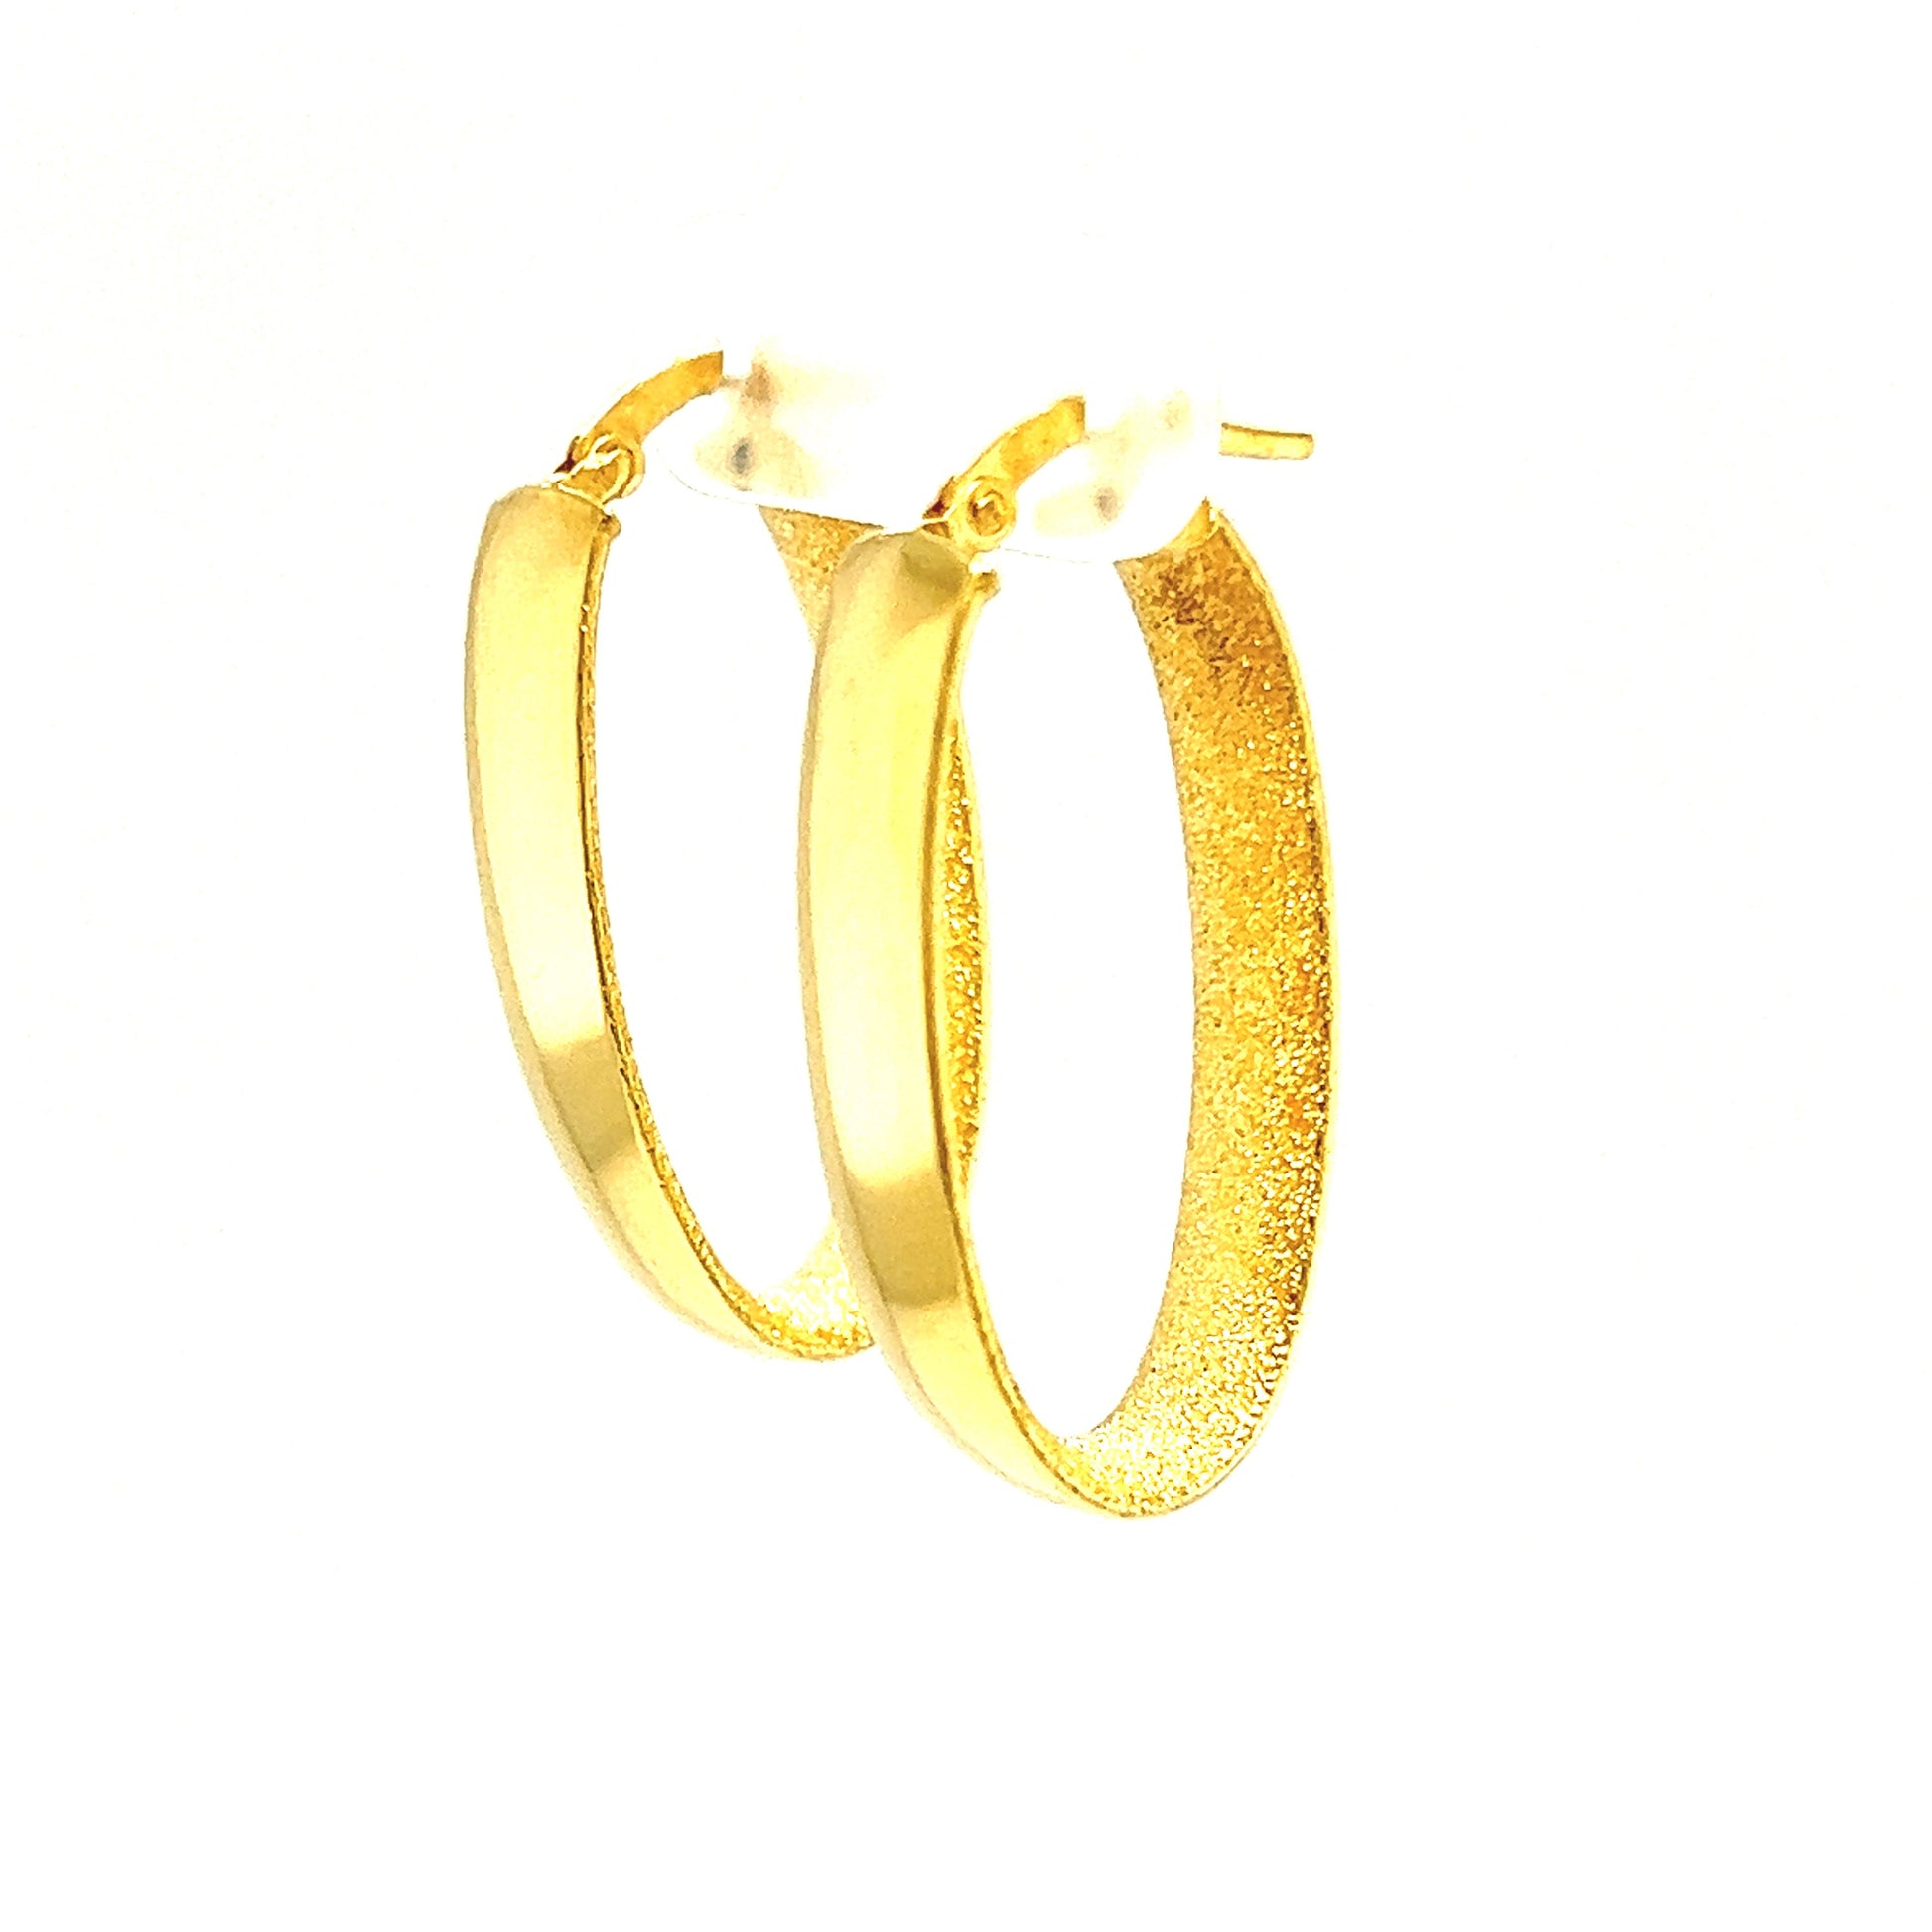 Oval Hoop 6mm Earrings with Star Dust Finish in 14K Yellow Gold Right Side View